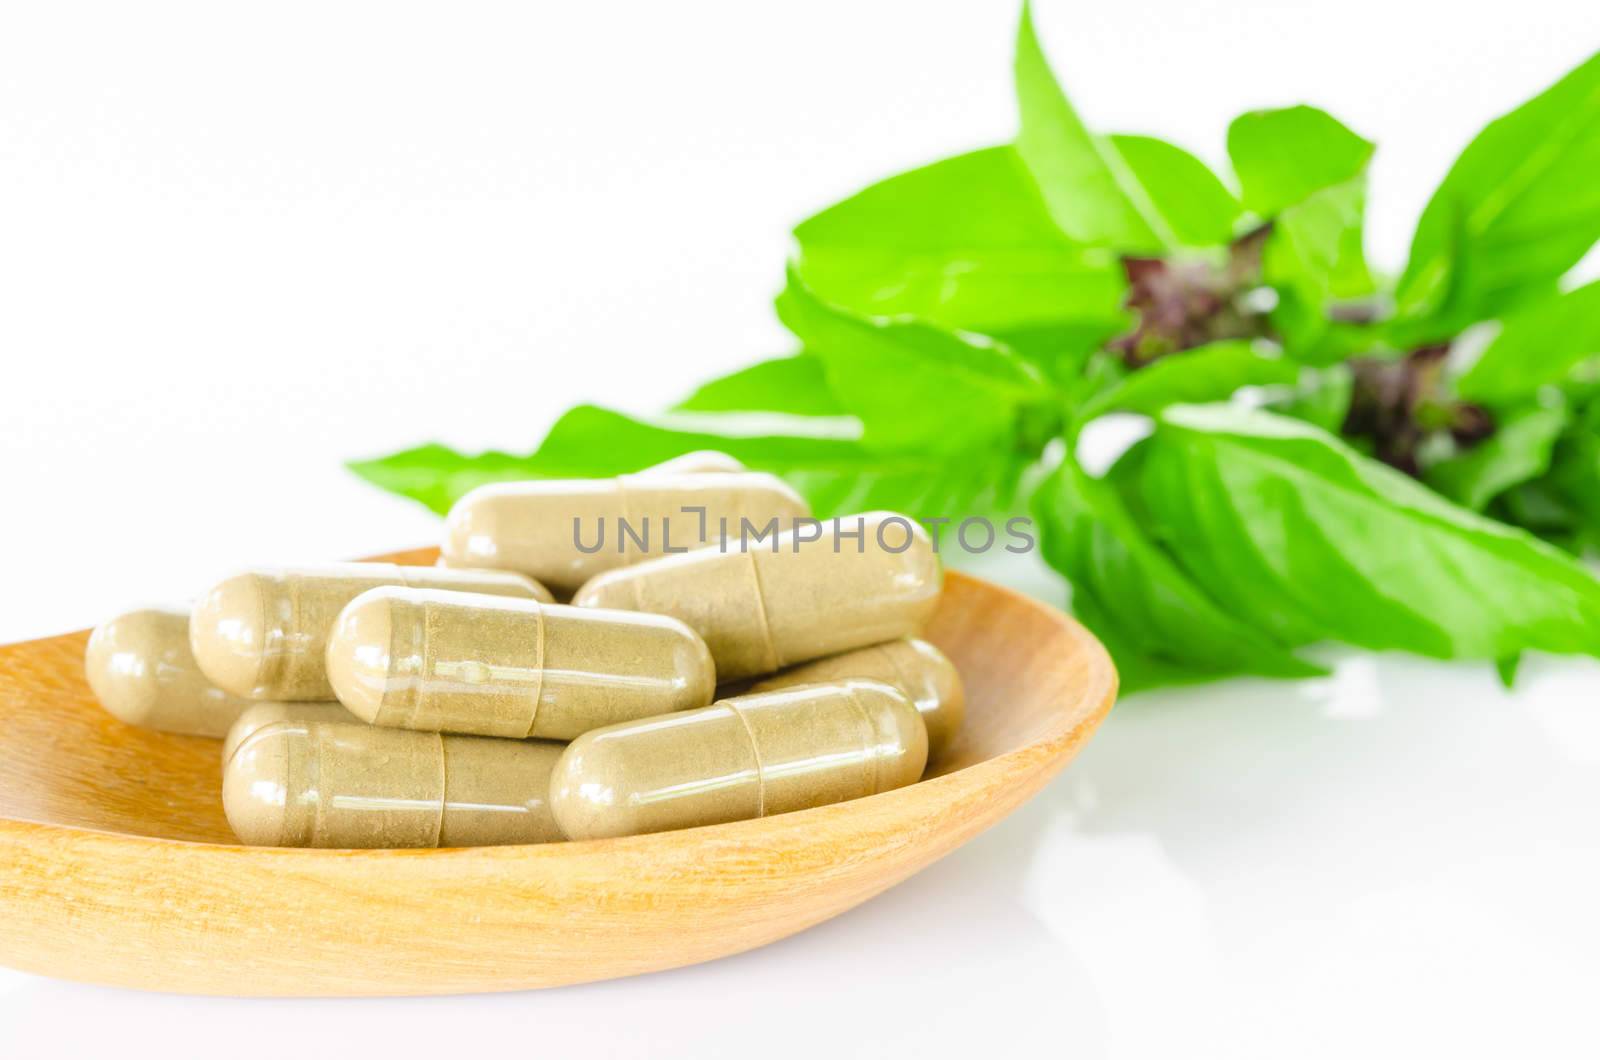 Yellow herbal capsule medicine drug in wooden spoon and green leaf on white background.